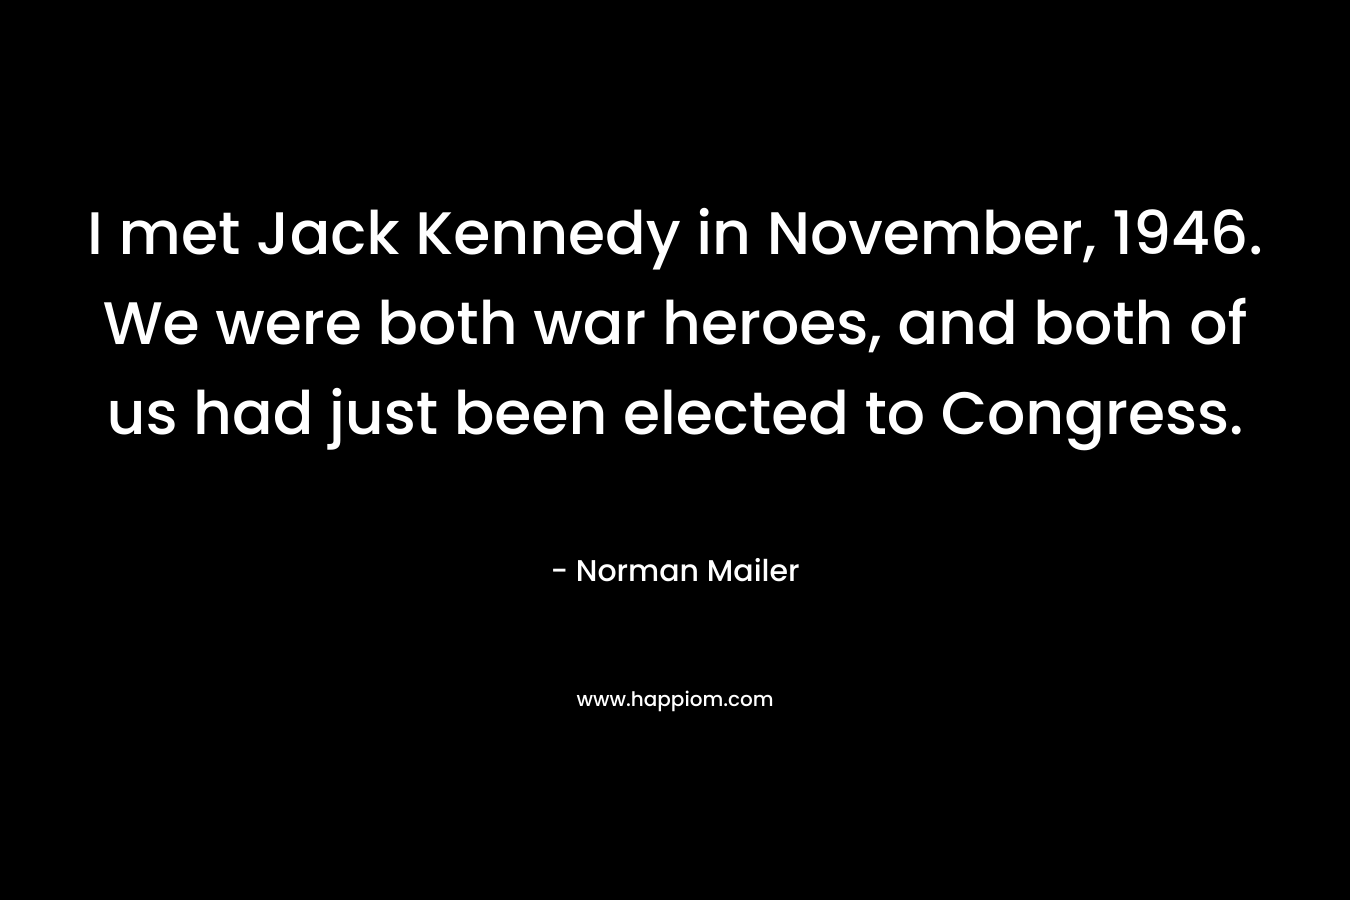 I met Jack Kennedy in November, 1946. We were both war heroes, and both of us had just been elected to Congress. – Norman Mailer